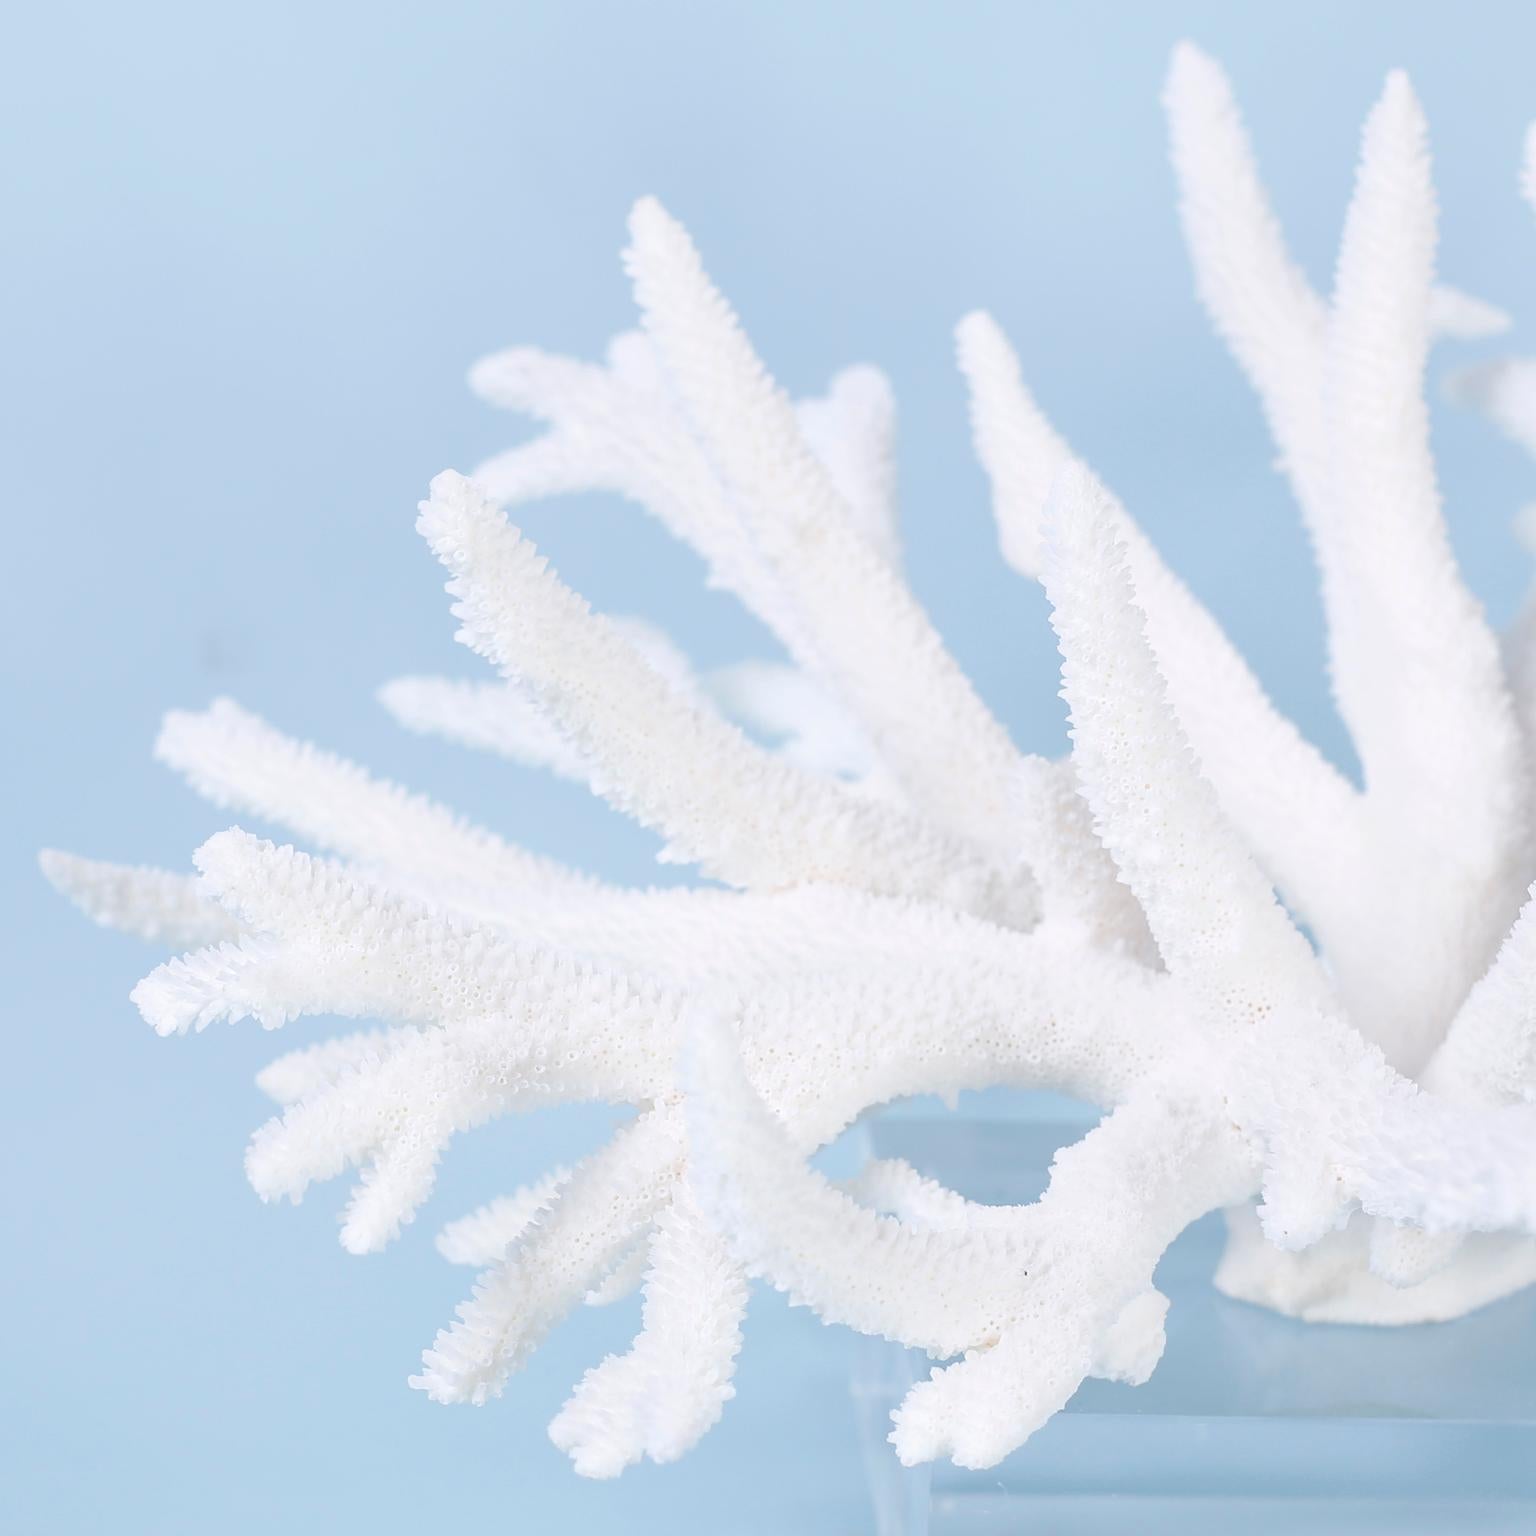 Staghorn coral specimen with its alluring bleached white color and sea inspired texture and form, presented on a Lucite base to enhance its sculptural elements.